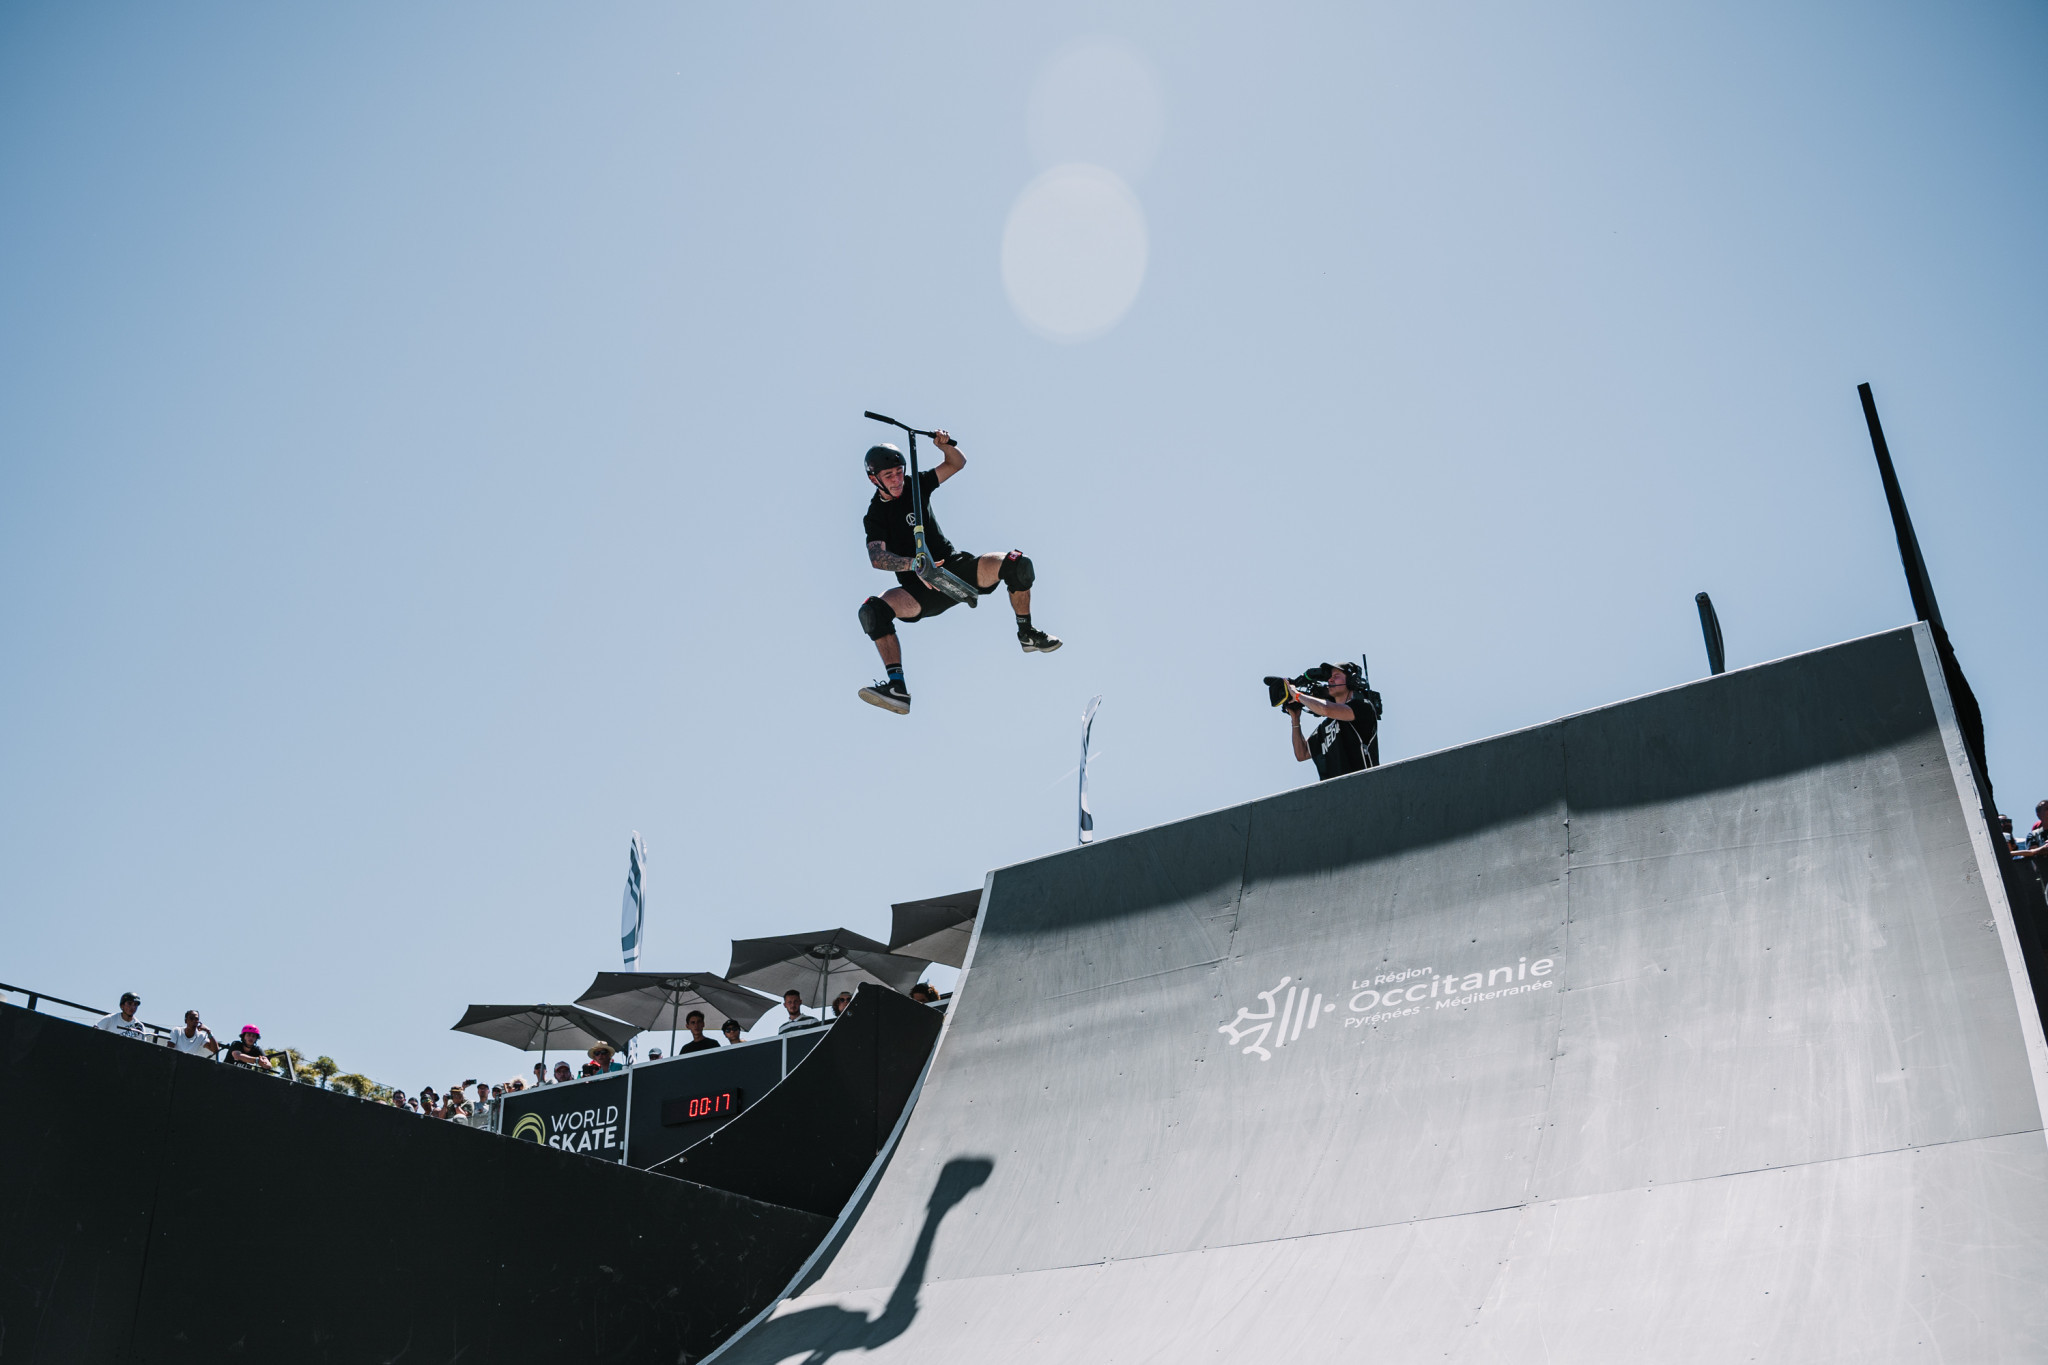 Hull's score of 93.50 means that he now has two titles from FISE 2022 after winning the spine ramp discipline as well ©Hurricane - FISE